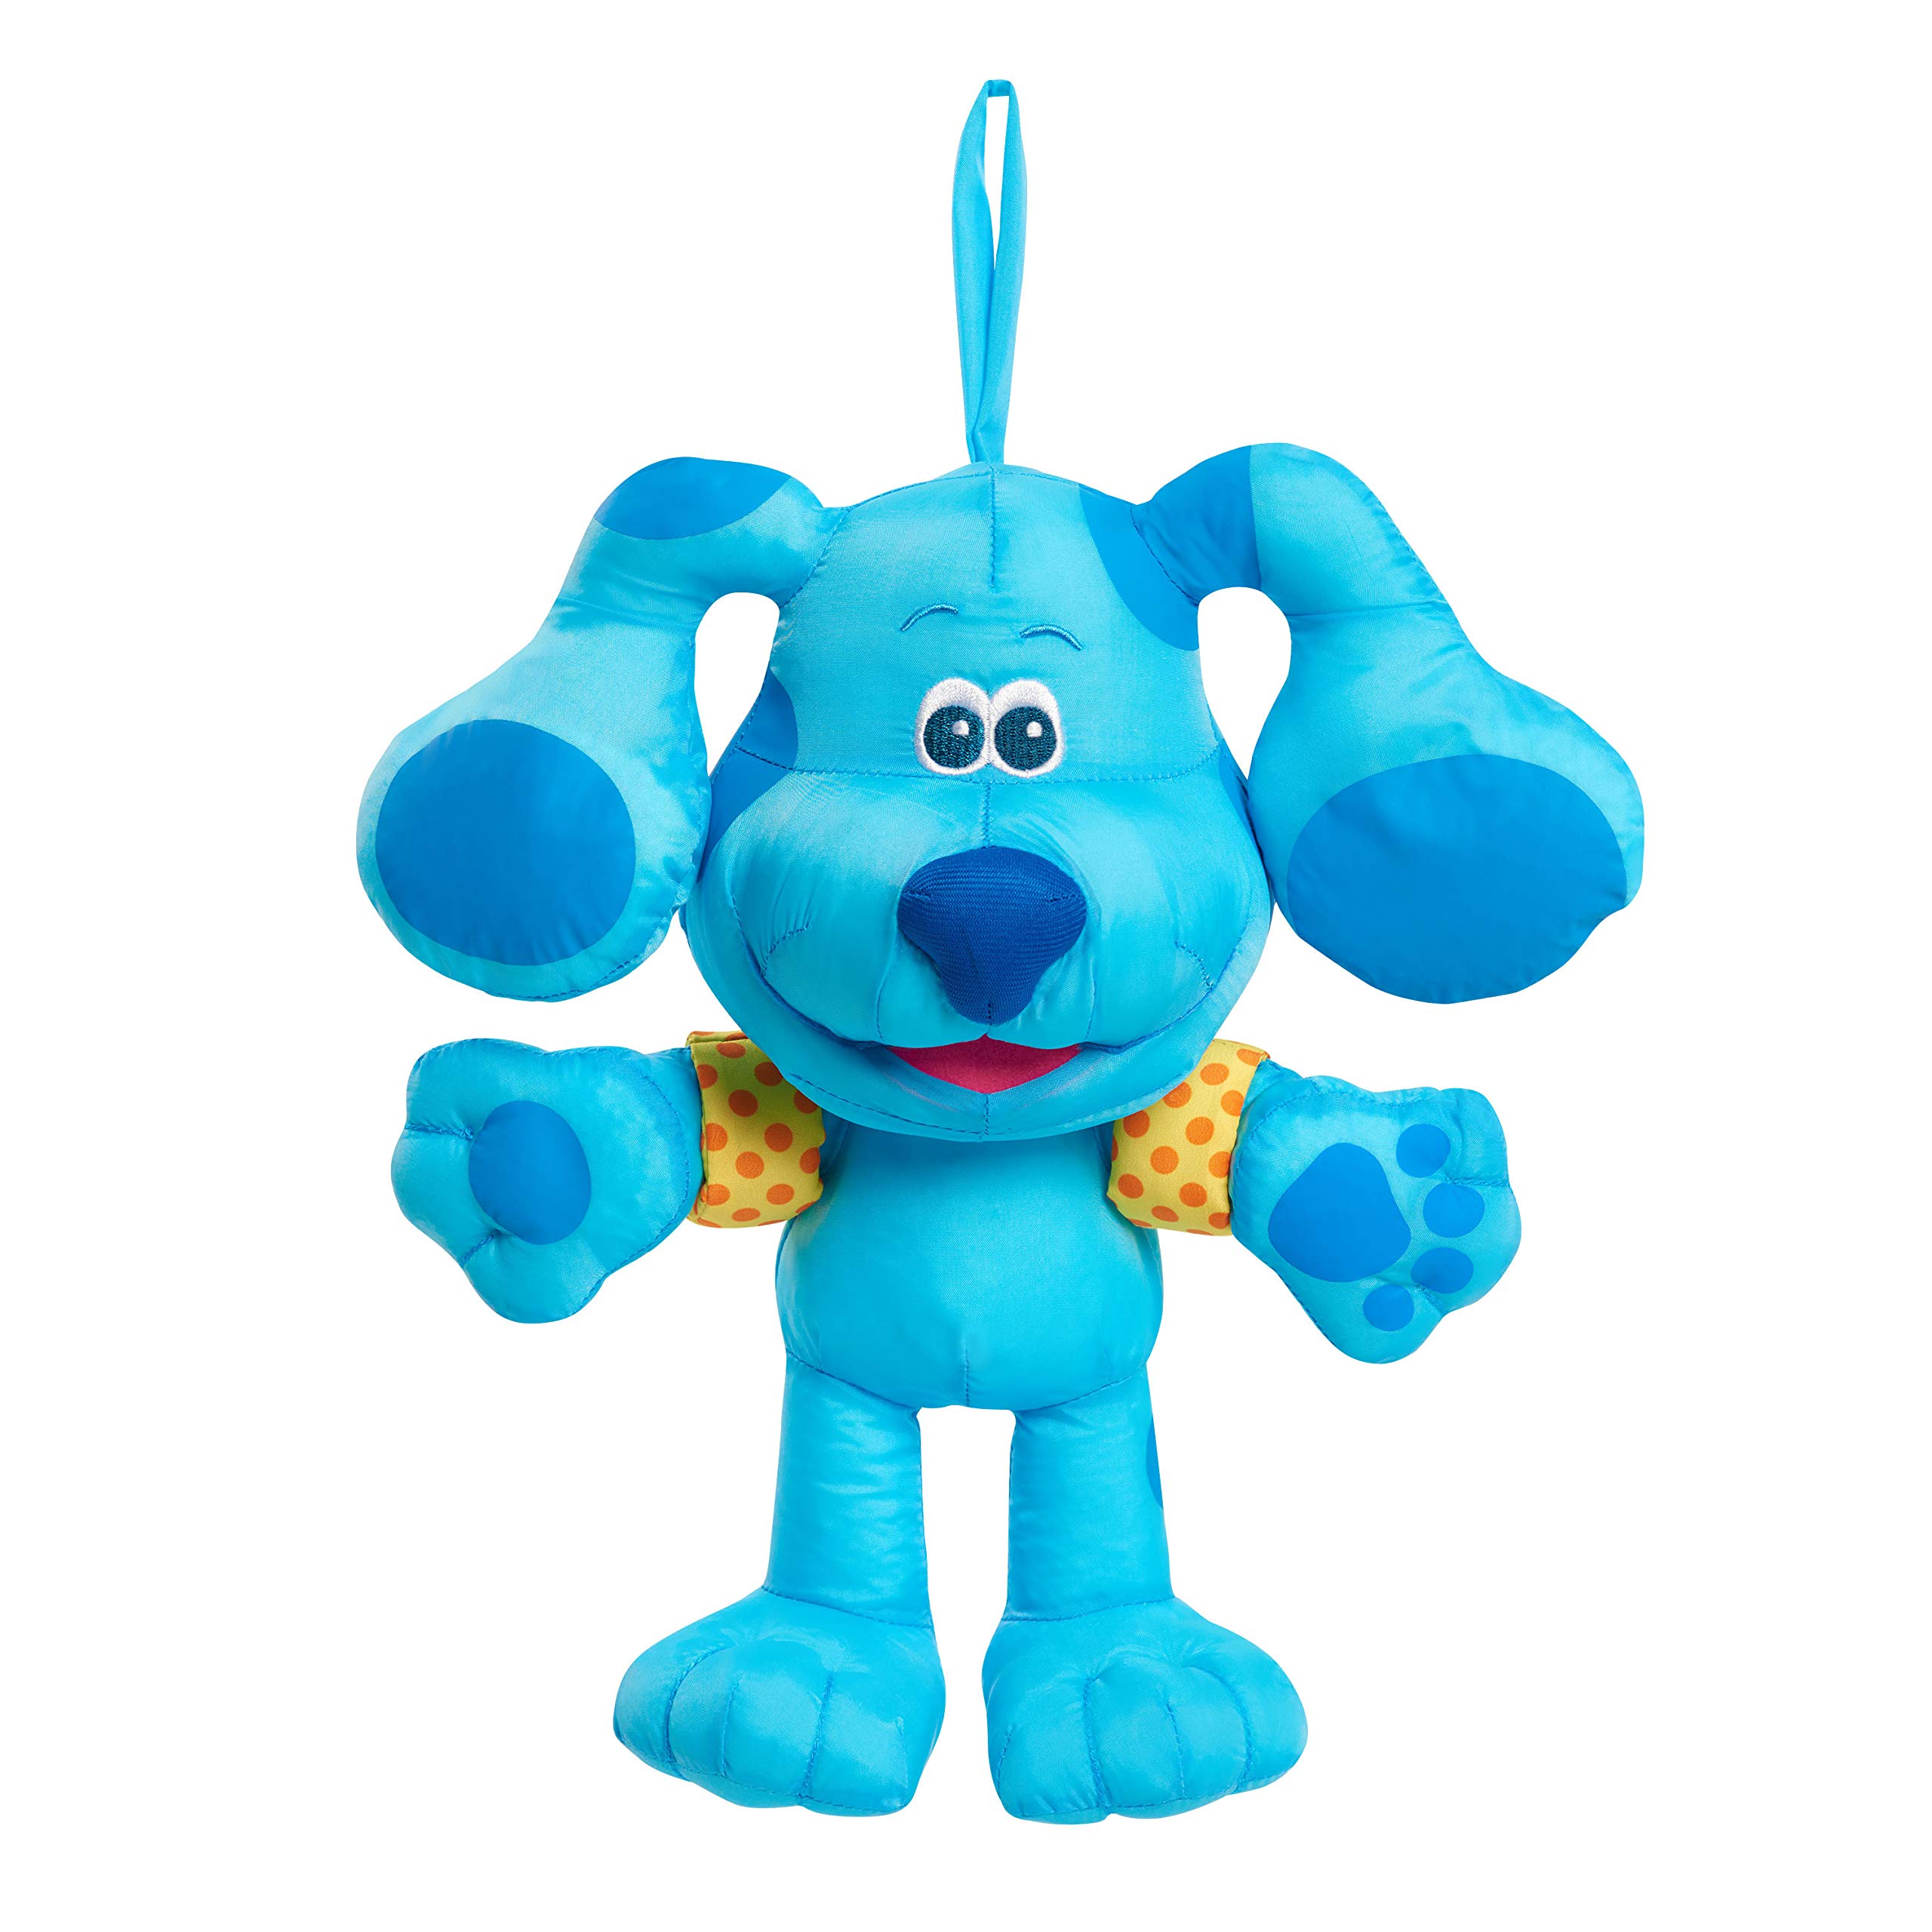 Amazon.com: Blue's Clues & You! Bath Time Blue Plush, Bath Toys for Kids, Stuffed Animals, Dog, by Just Play : Toys & Games $7.49